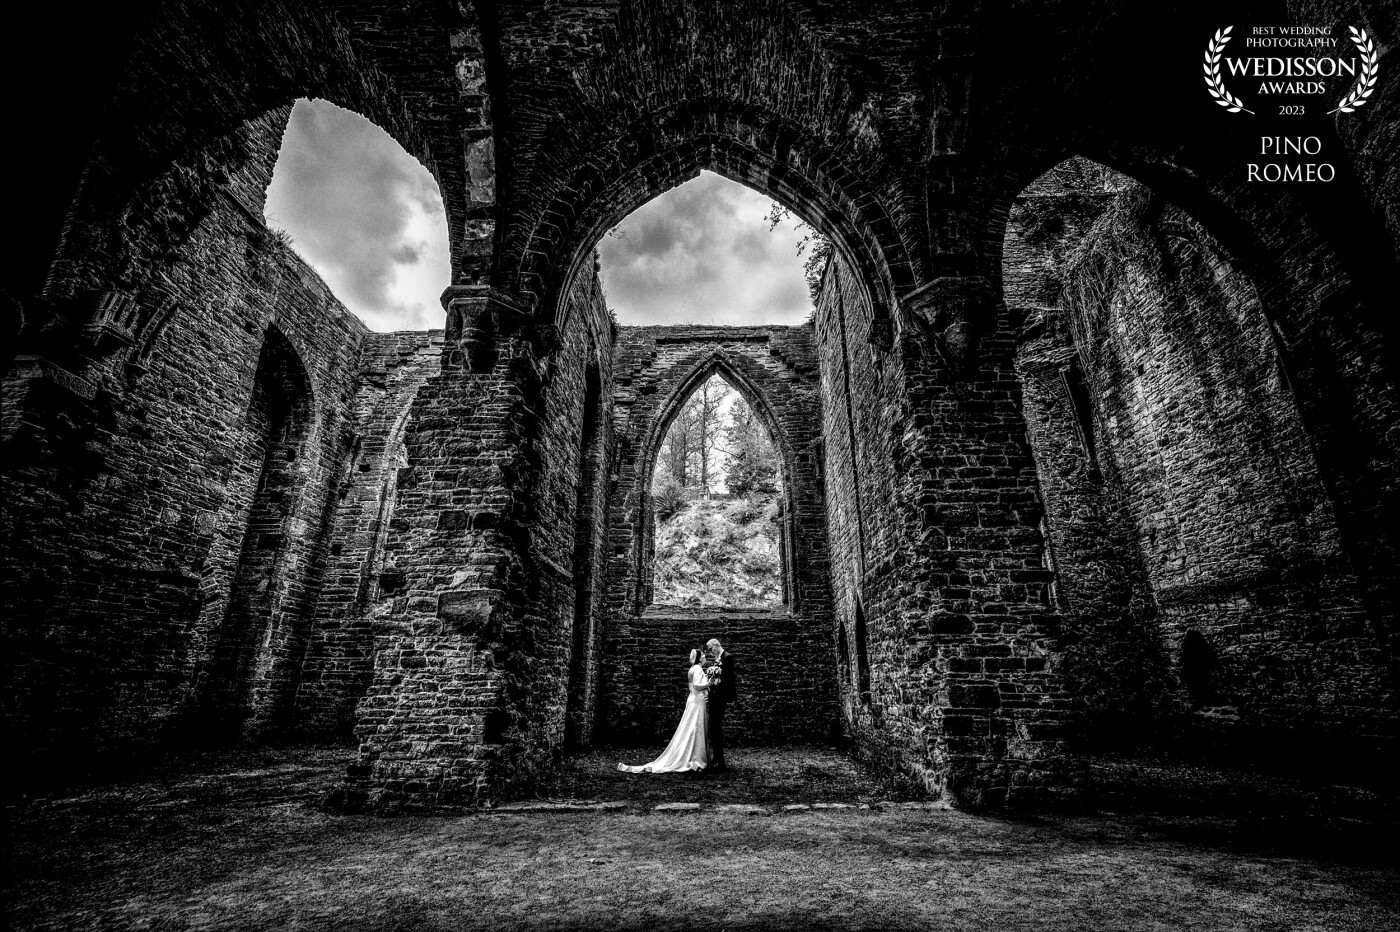 It's a great pleasure to receive this 28th award, and the second resulting from this magnificent portrait session of Anne-Sophie and Xaxier, in the ruins of Villers Abbey, Belgium.   The beautiful bride is the great-niece of a world-famous Belgian cartoonist who has inspired generations of children and adults the world over.  It's a huge honour for me to have two award-winning photos of this wedding, and I dedicate them to Spirou, Gaston, the Marsupilami, and that masterpiece of black humour, Idées Noires.